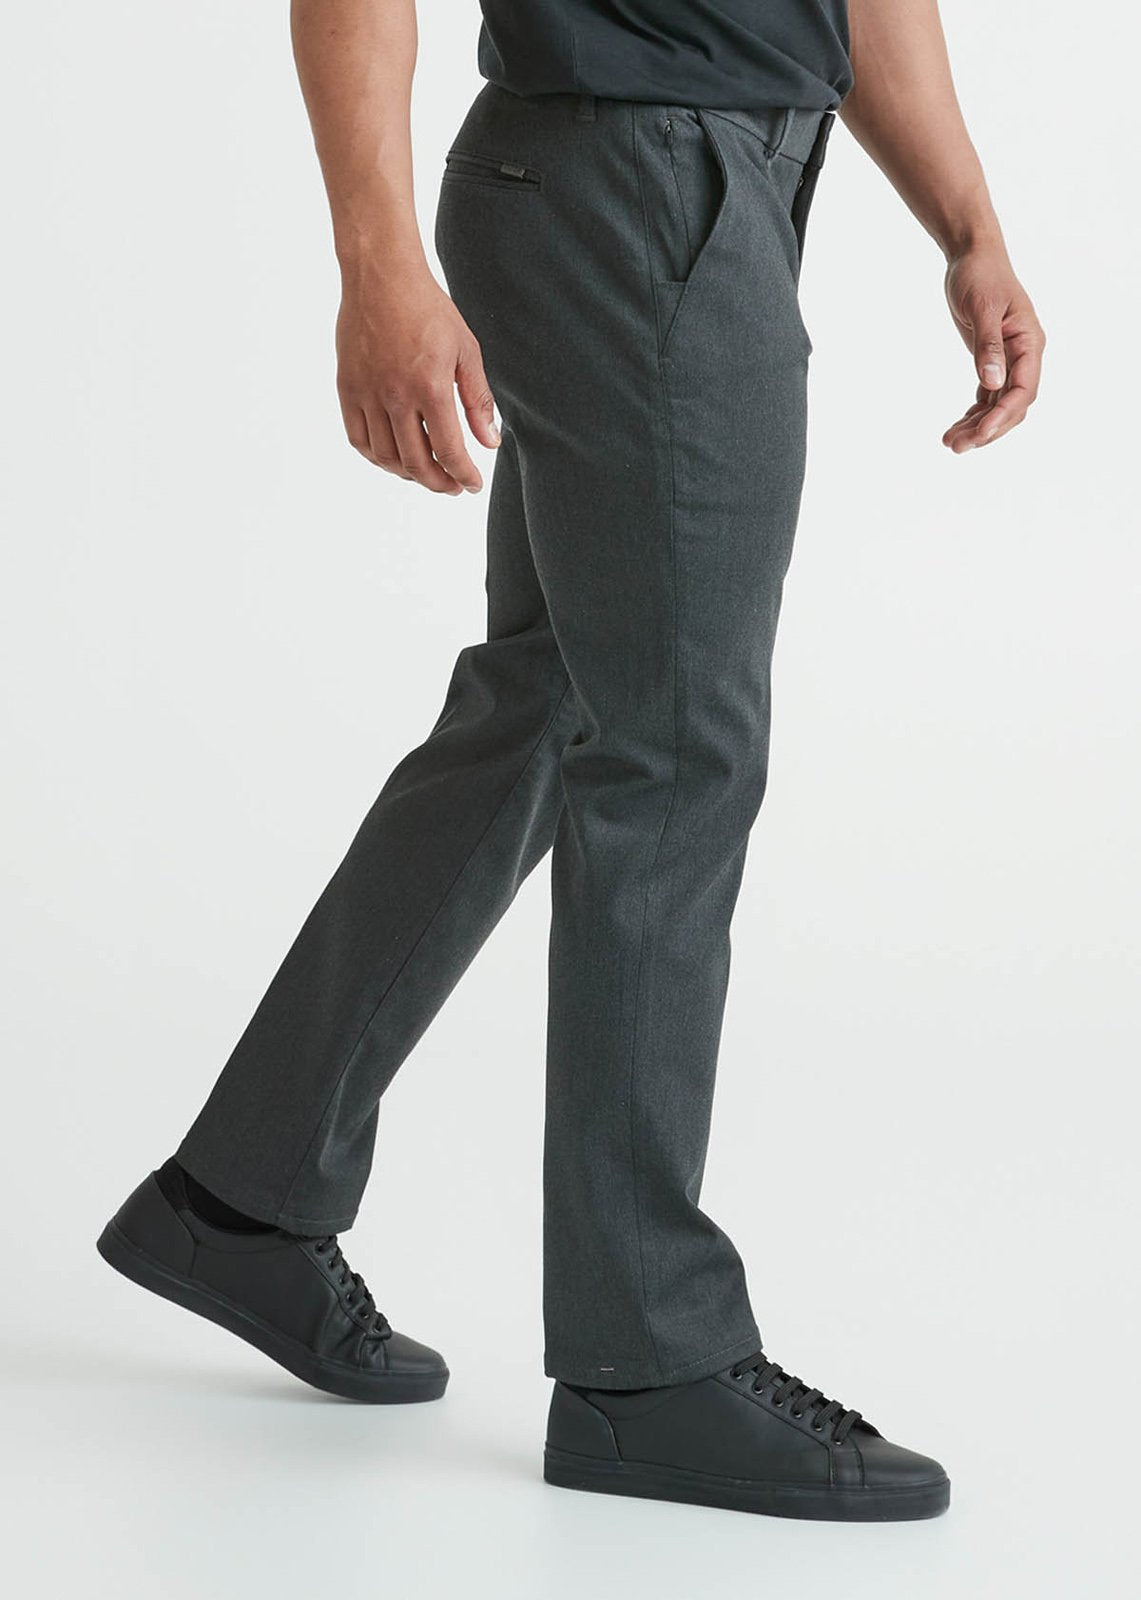 Smart Stretch Fabric Collection - Comfy Dress Pants